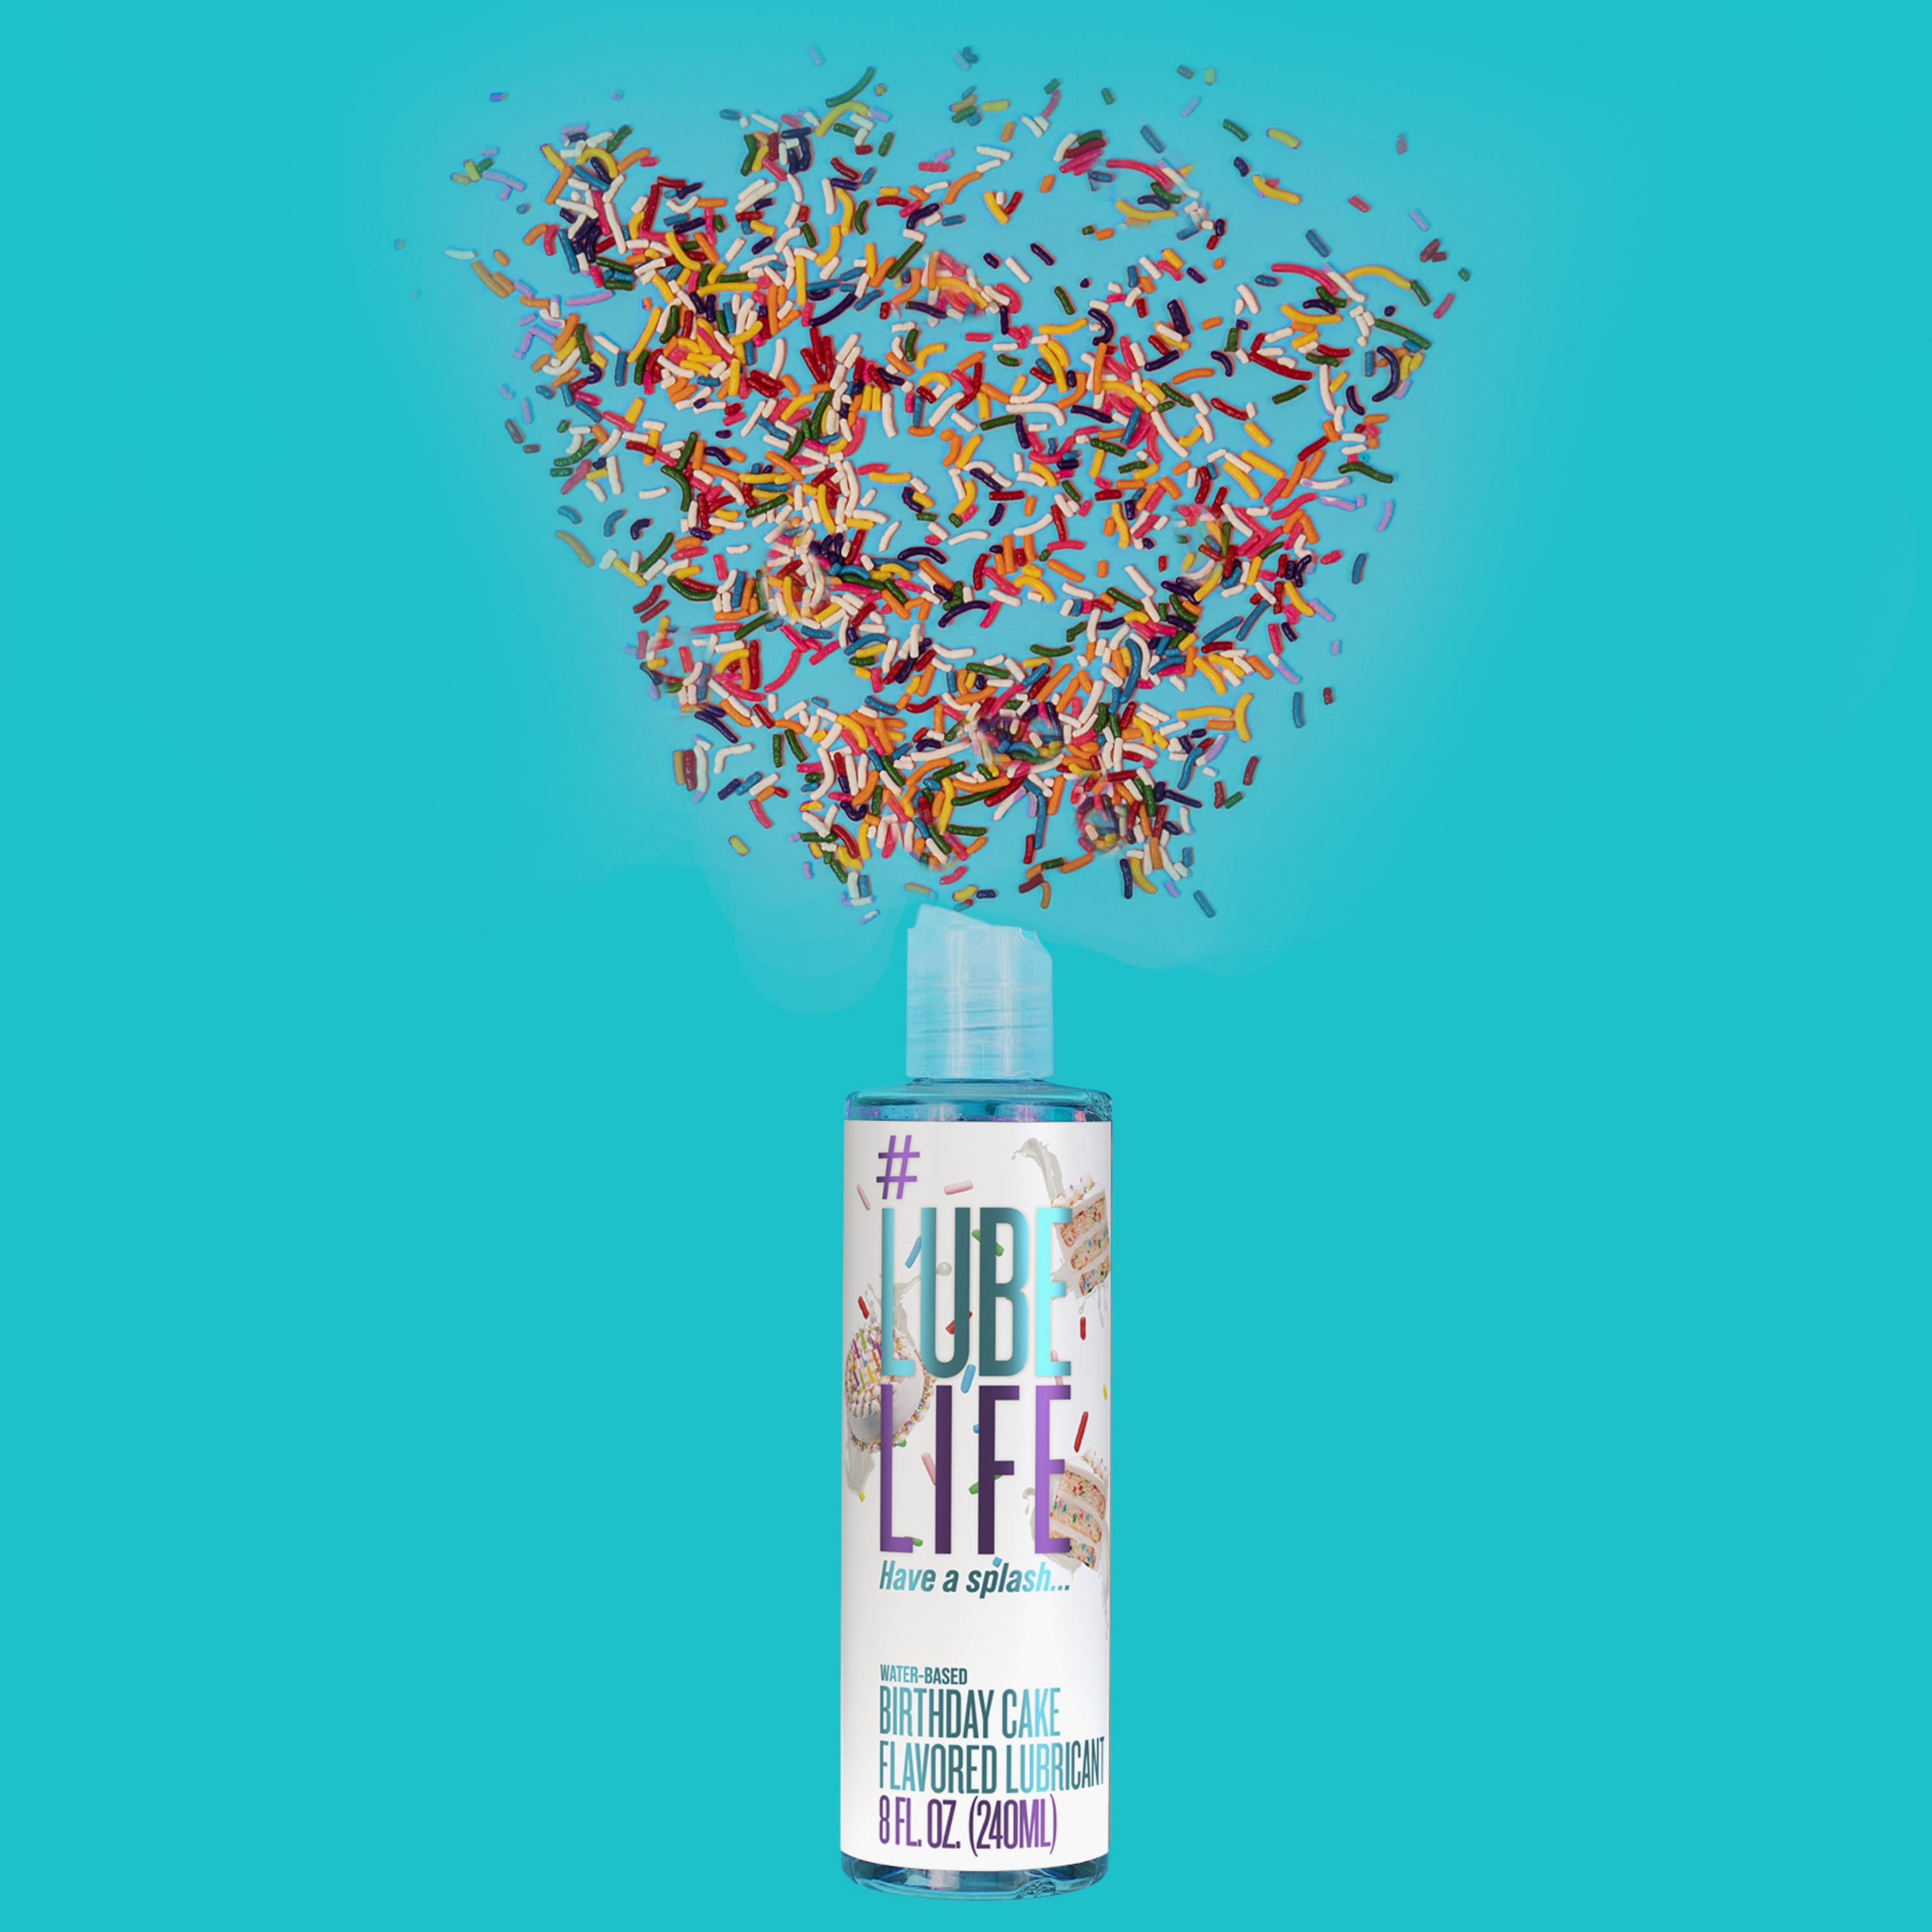 Lube Life Water-Based Birthday Cake Flavored Lubricant, 8 fl oz - image 5 of 5